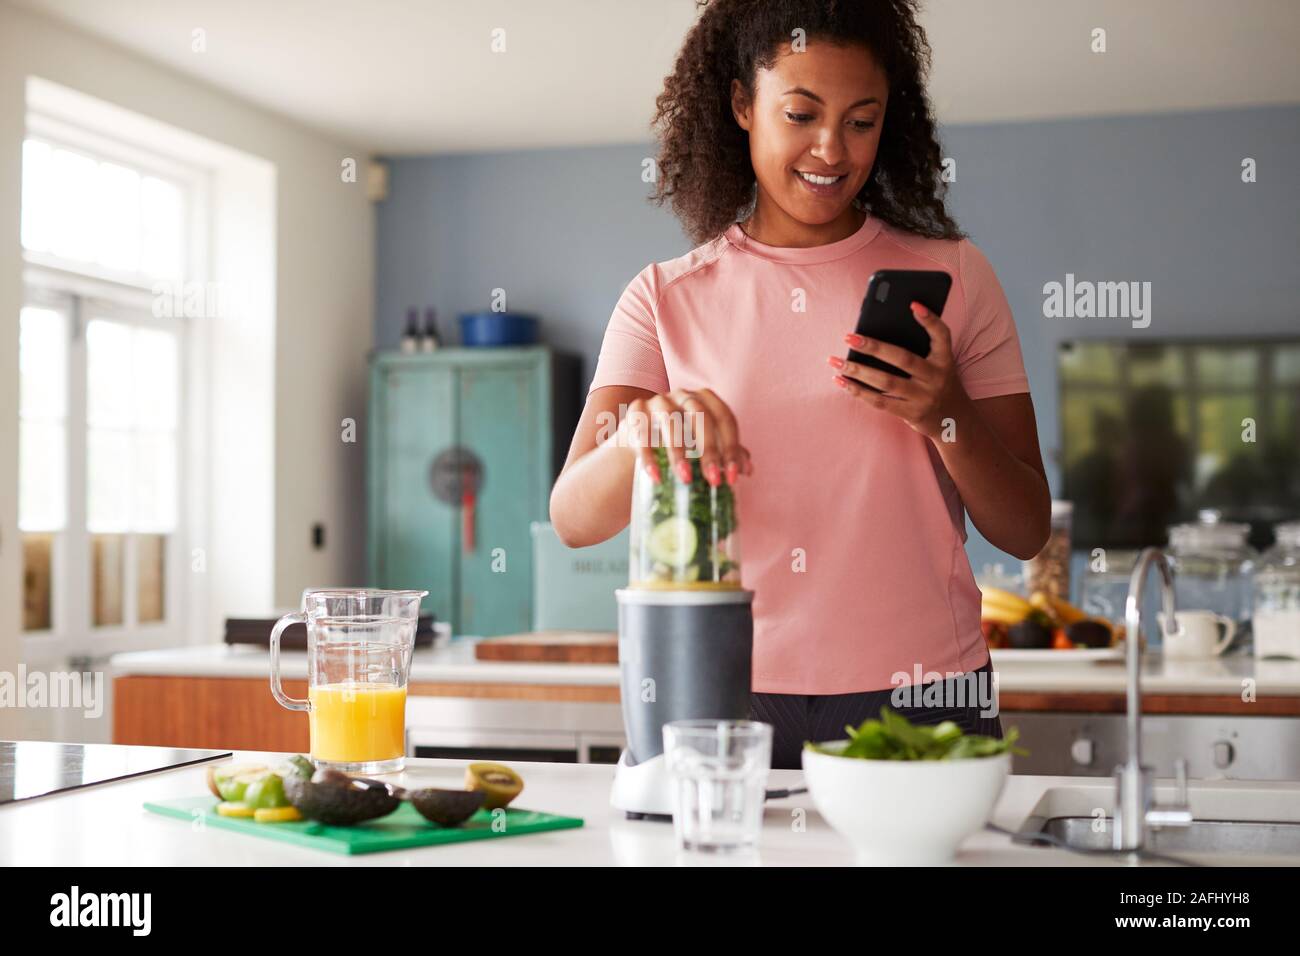 Woman Using Fitness Tracker To Count Calories For Post Workout Juice Drink He Is Making Stock Photo